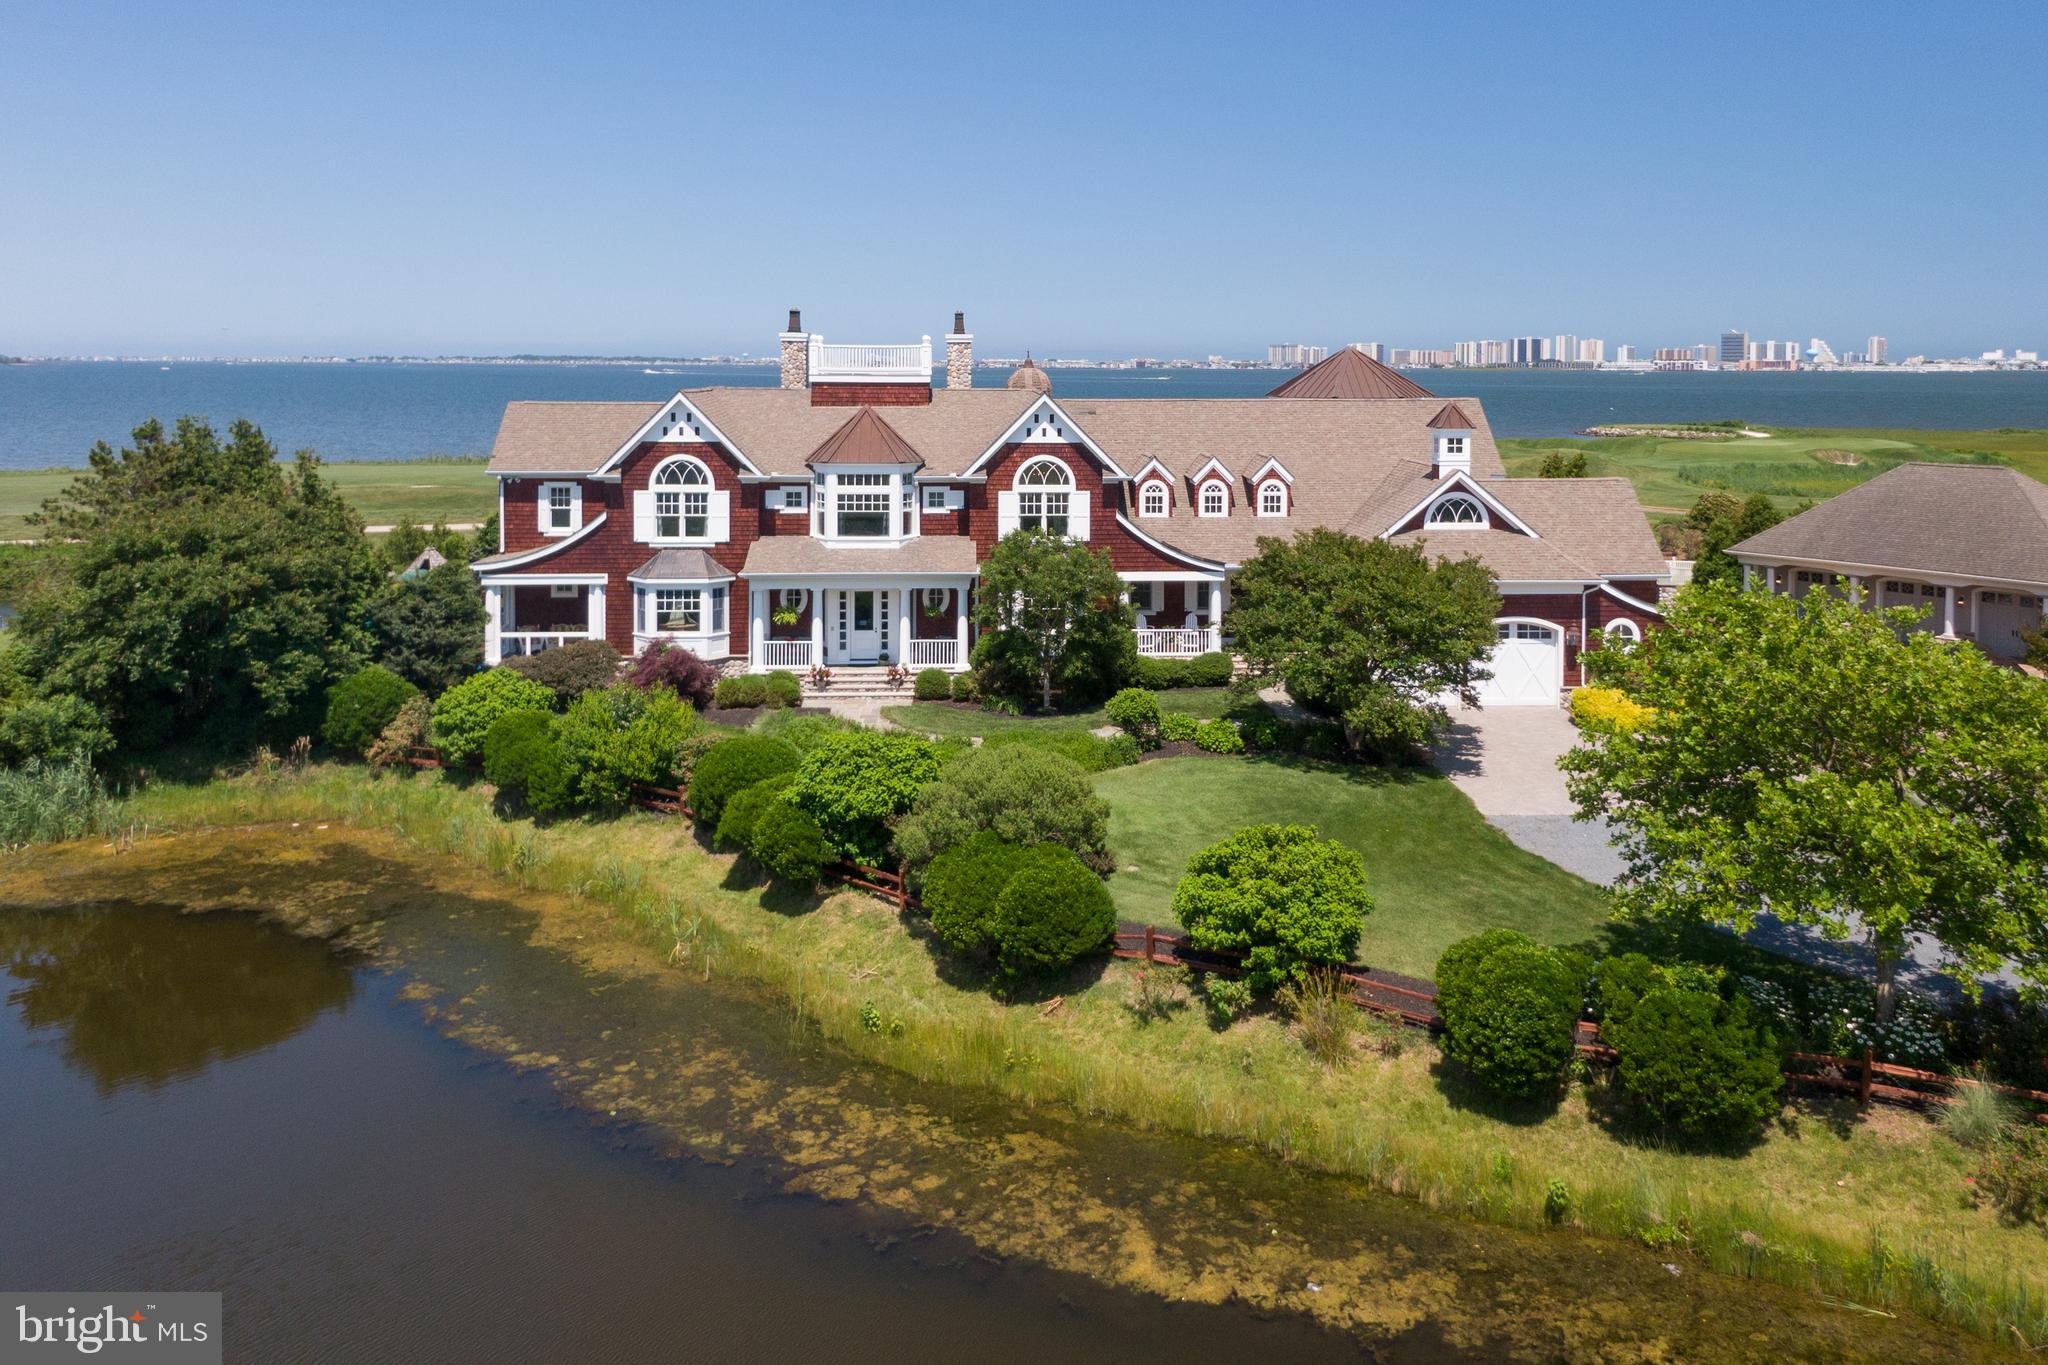 Award winning estate…this crown jewel of the Eastern Shore’s coastal corridor is situated on an acre of land overlooking indigenous habitat ponds, Links of Lighthouse Sound 4th,5th and 6th fairways and the stunning panoramic view of Assawoman Bay and the Ocean City Skyline. A collaboration of NYC and Washington DC design teams along with local artisans, this property is truly a work of art. It begins as you drive onto the stone bridge entrance, one will begin to appreciate the blend of beauty of this Hamptons-style, cedar shingled home and the Eastern Shore way of life. All rooms within the home offer stunning architectural elements and have spectacular views of Coastal natural habitats. Through the main entrance of the home, you step into an elegant foyer and beyond is the spacious living room offering a 20’ceiling, stunning picture window and commissioned aged glass mirror above the limestone fireplace. The billiard room and den features custom Honduran Mahogany woodwork throughout, full bar area with granite countertops and side porch. To the right of the foyer is an elegant dining room featuring Gracie hand-painted wallpaper depicting paintings of our local Audubon setting. The bay window allows for breathtaking sunsets during evening dining. The chef’s kitchen with Carrara Italian marble, Wolfe appliances and custom tile includes a breakfast room and cozy sitting area. As an extension of the kitchen, the Butler’s pantry features granite countertops, a 120-bottle wine refrigerator, copper sink and separate beverage refrigerator. The 3-story octagonal turret overlooks the 40x16 gated pool and hot tub with hardscape. On the second floor, the primary bedroom offers a gas fireplace, reading area, private balcony, striking ensuite with separate 17’x22’ dressing room. The yoga/flex room has 5 magnificent 5’ circular windows which takes full advantage of the peaceful bay and golf course views. The top-level observatory serves as a perfect home office adding the morning